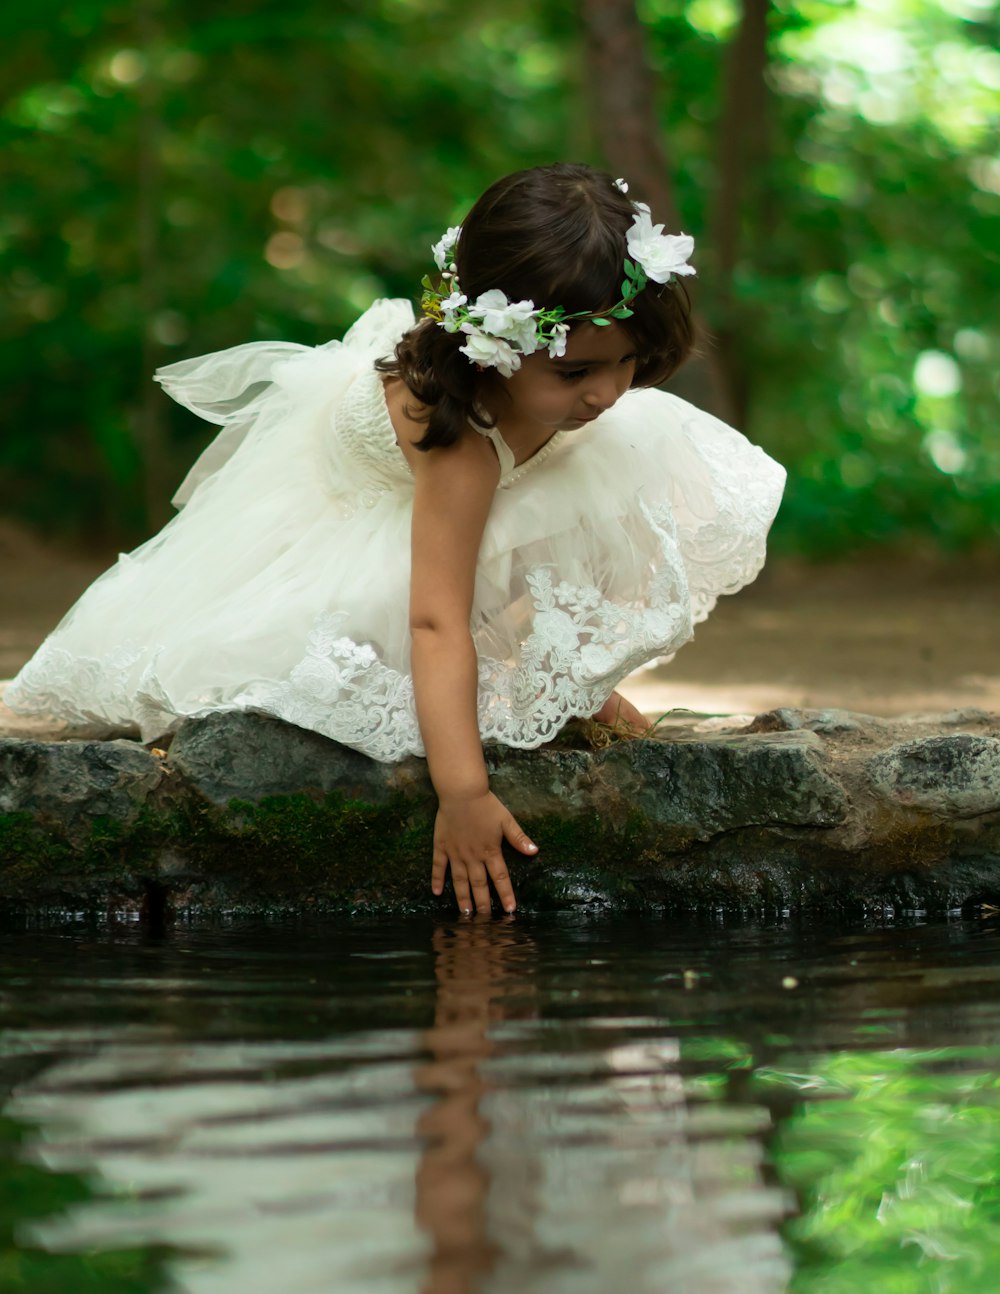 girl in white dress reaching for water in puddle